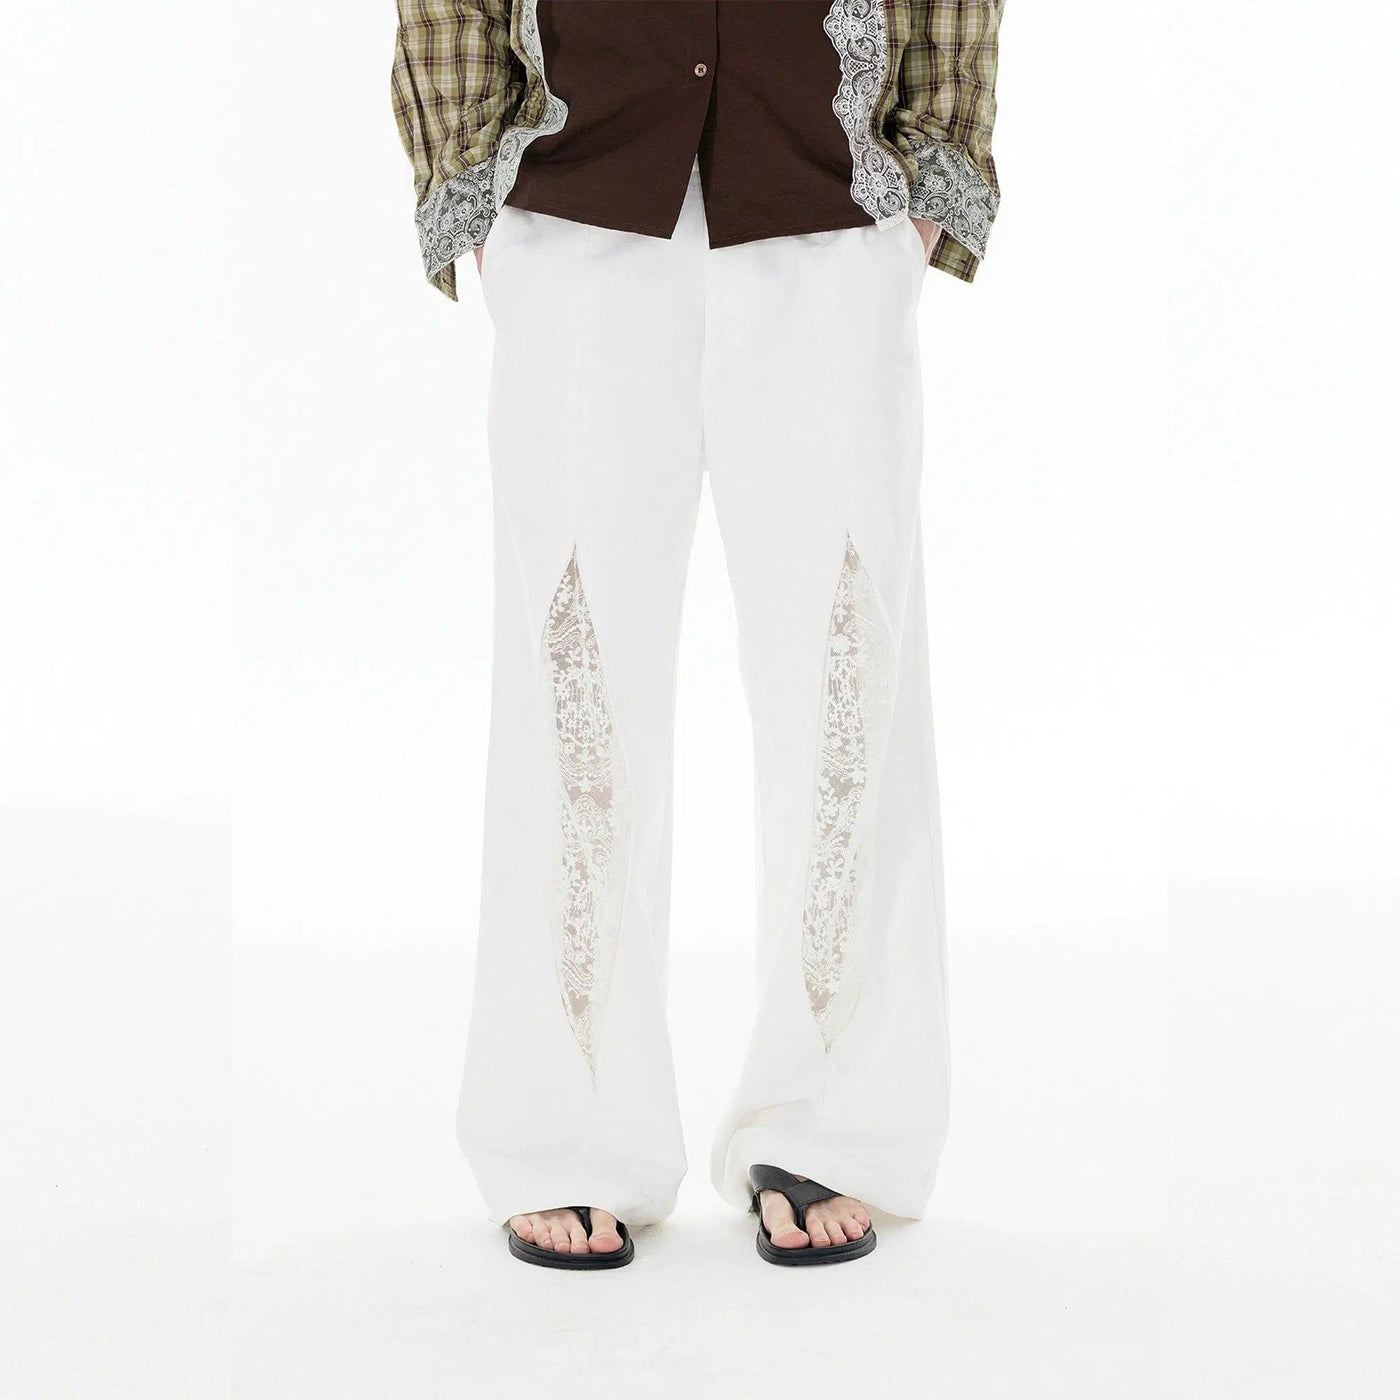 Casual Fireworks Pants Korean Street Fashion Pants By Apriority Shop Online at OH Vault